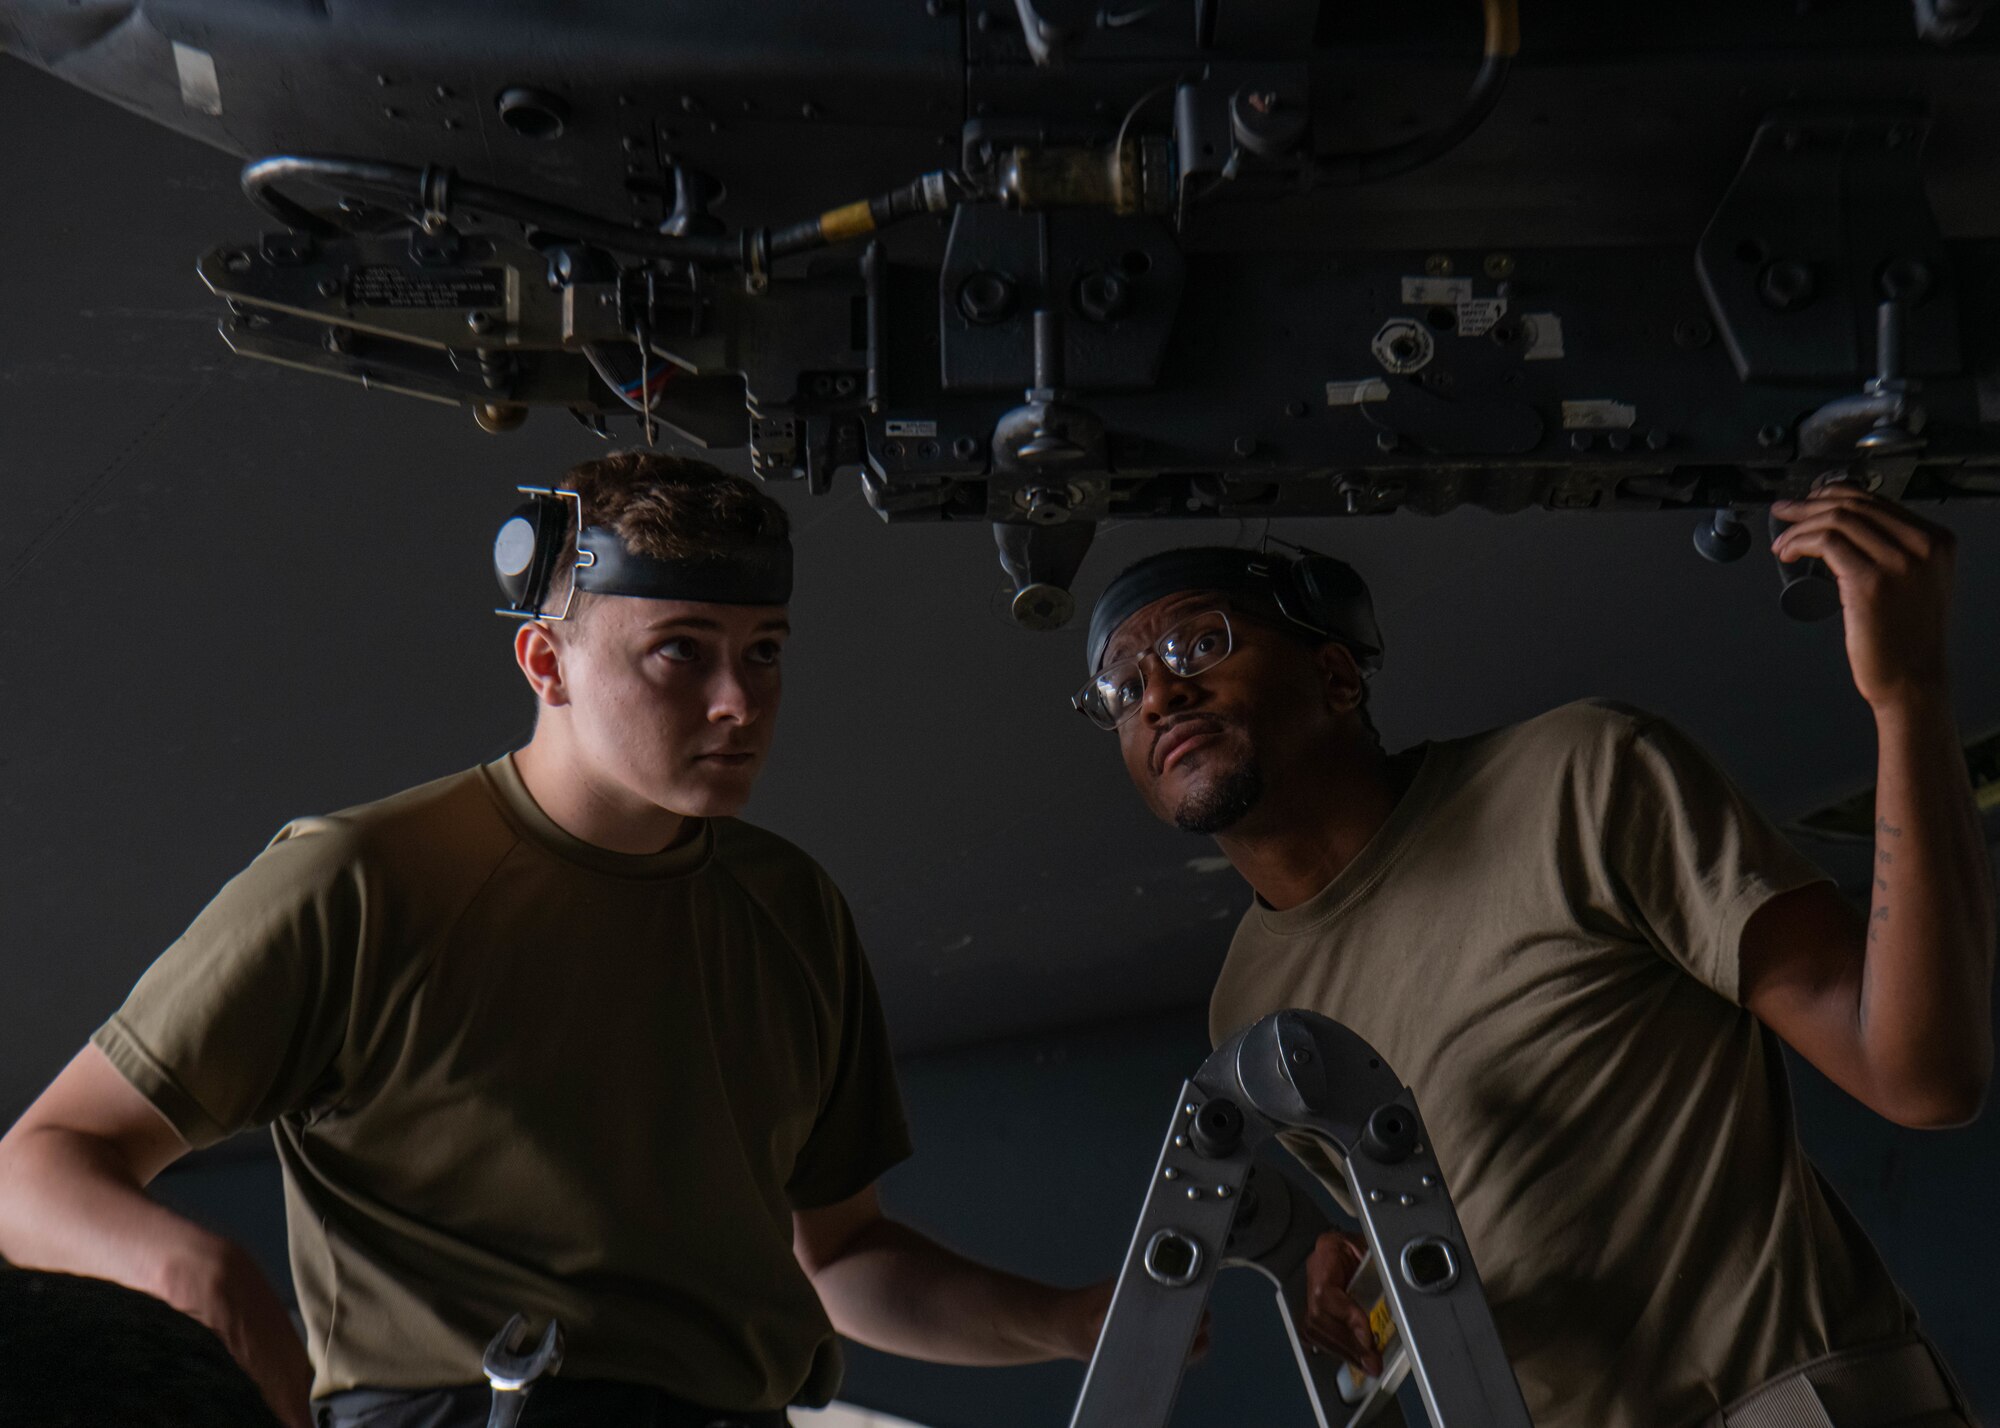 Senior Airman Cody Brittain (left) and U.S. Air Force Staff Sergeant Tony Rodgers, 5th Aircraft Maintenance Squadron load crew members, inspect the wing pylon of a B-52H Stratofortress at Minot Air Force Base, North Dakota, July 14, 2023. The B-52H Stratofortress is capable of carrying up to 70,000 pounds of munitions. (U.S. Air Force photo by Airman 1st Class Kyle Wilson)